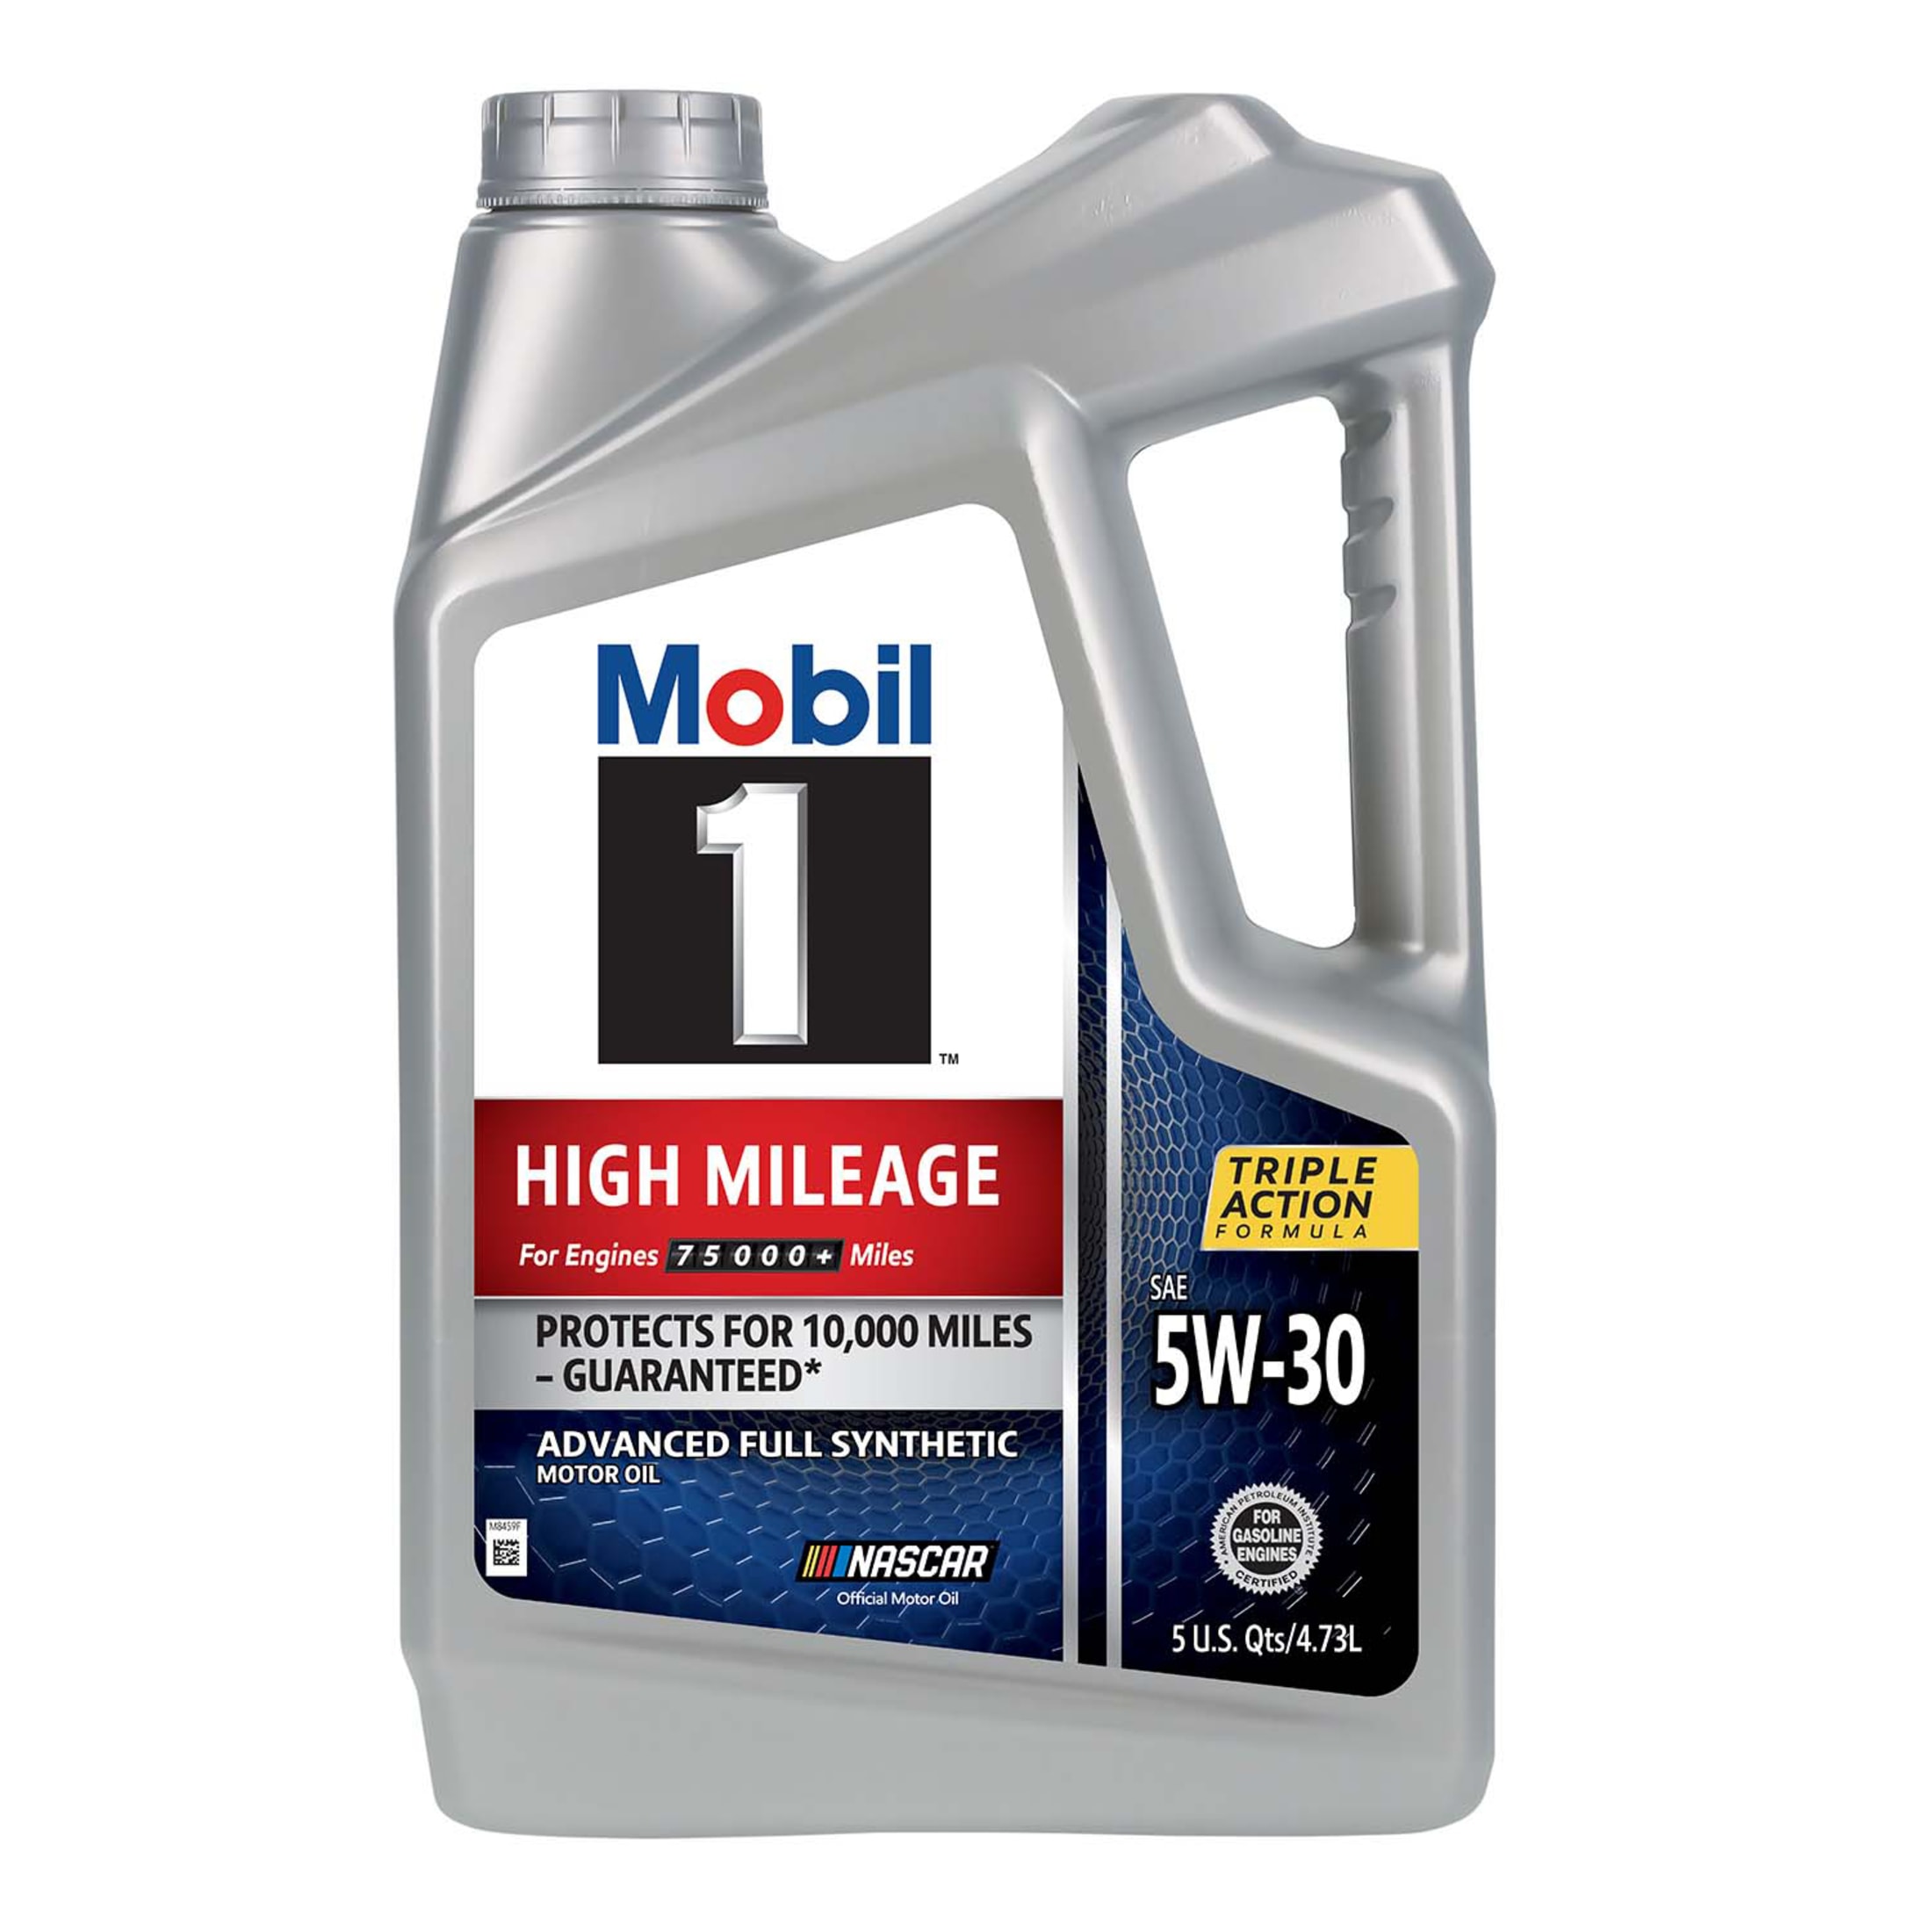 Mobil 1 High Mileage Full Synthetic Motor Oil 5W-30, 5 Quart - image 1 of 9